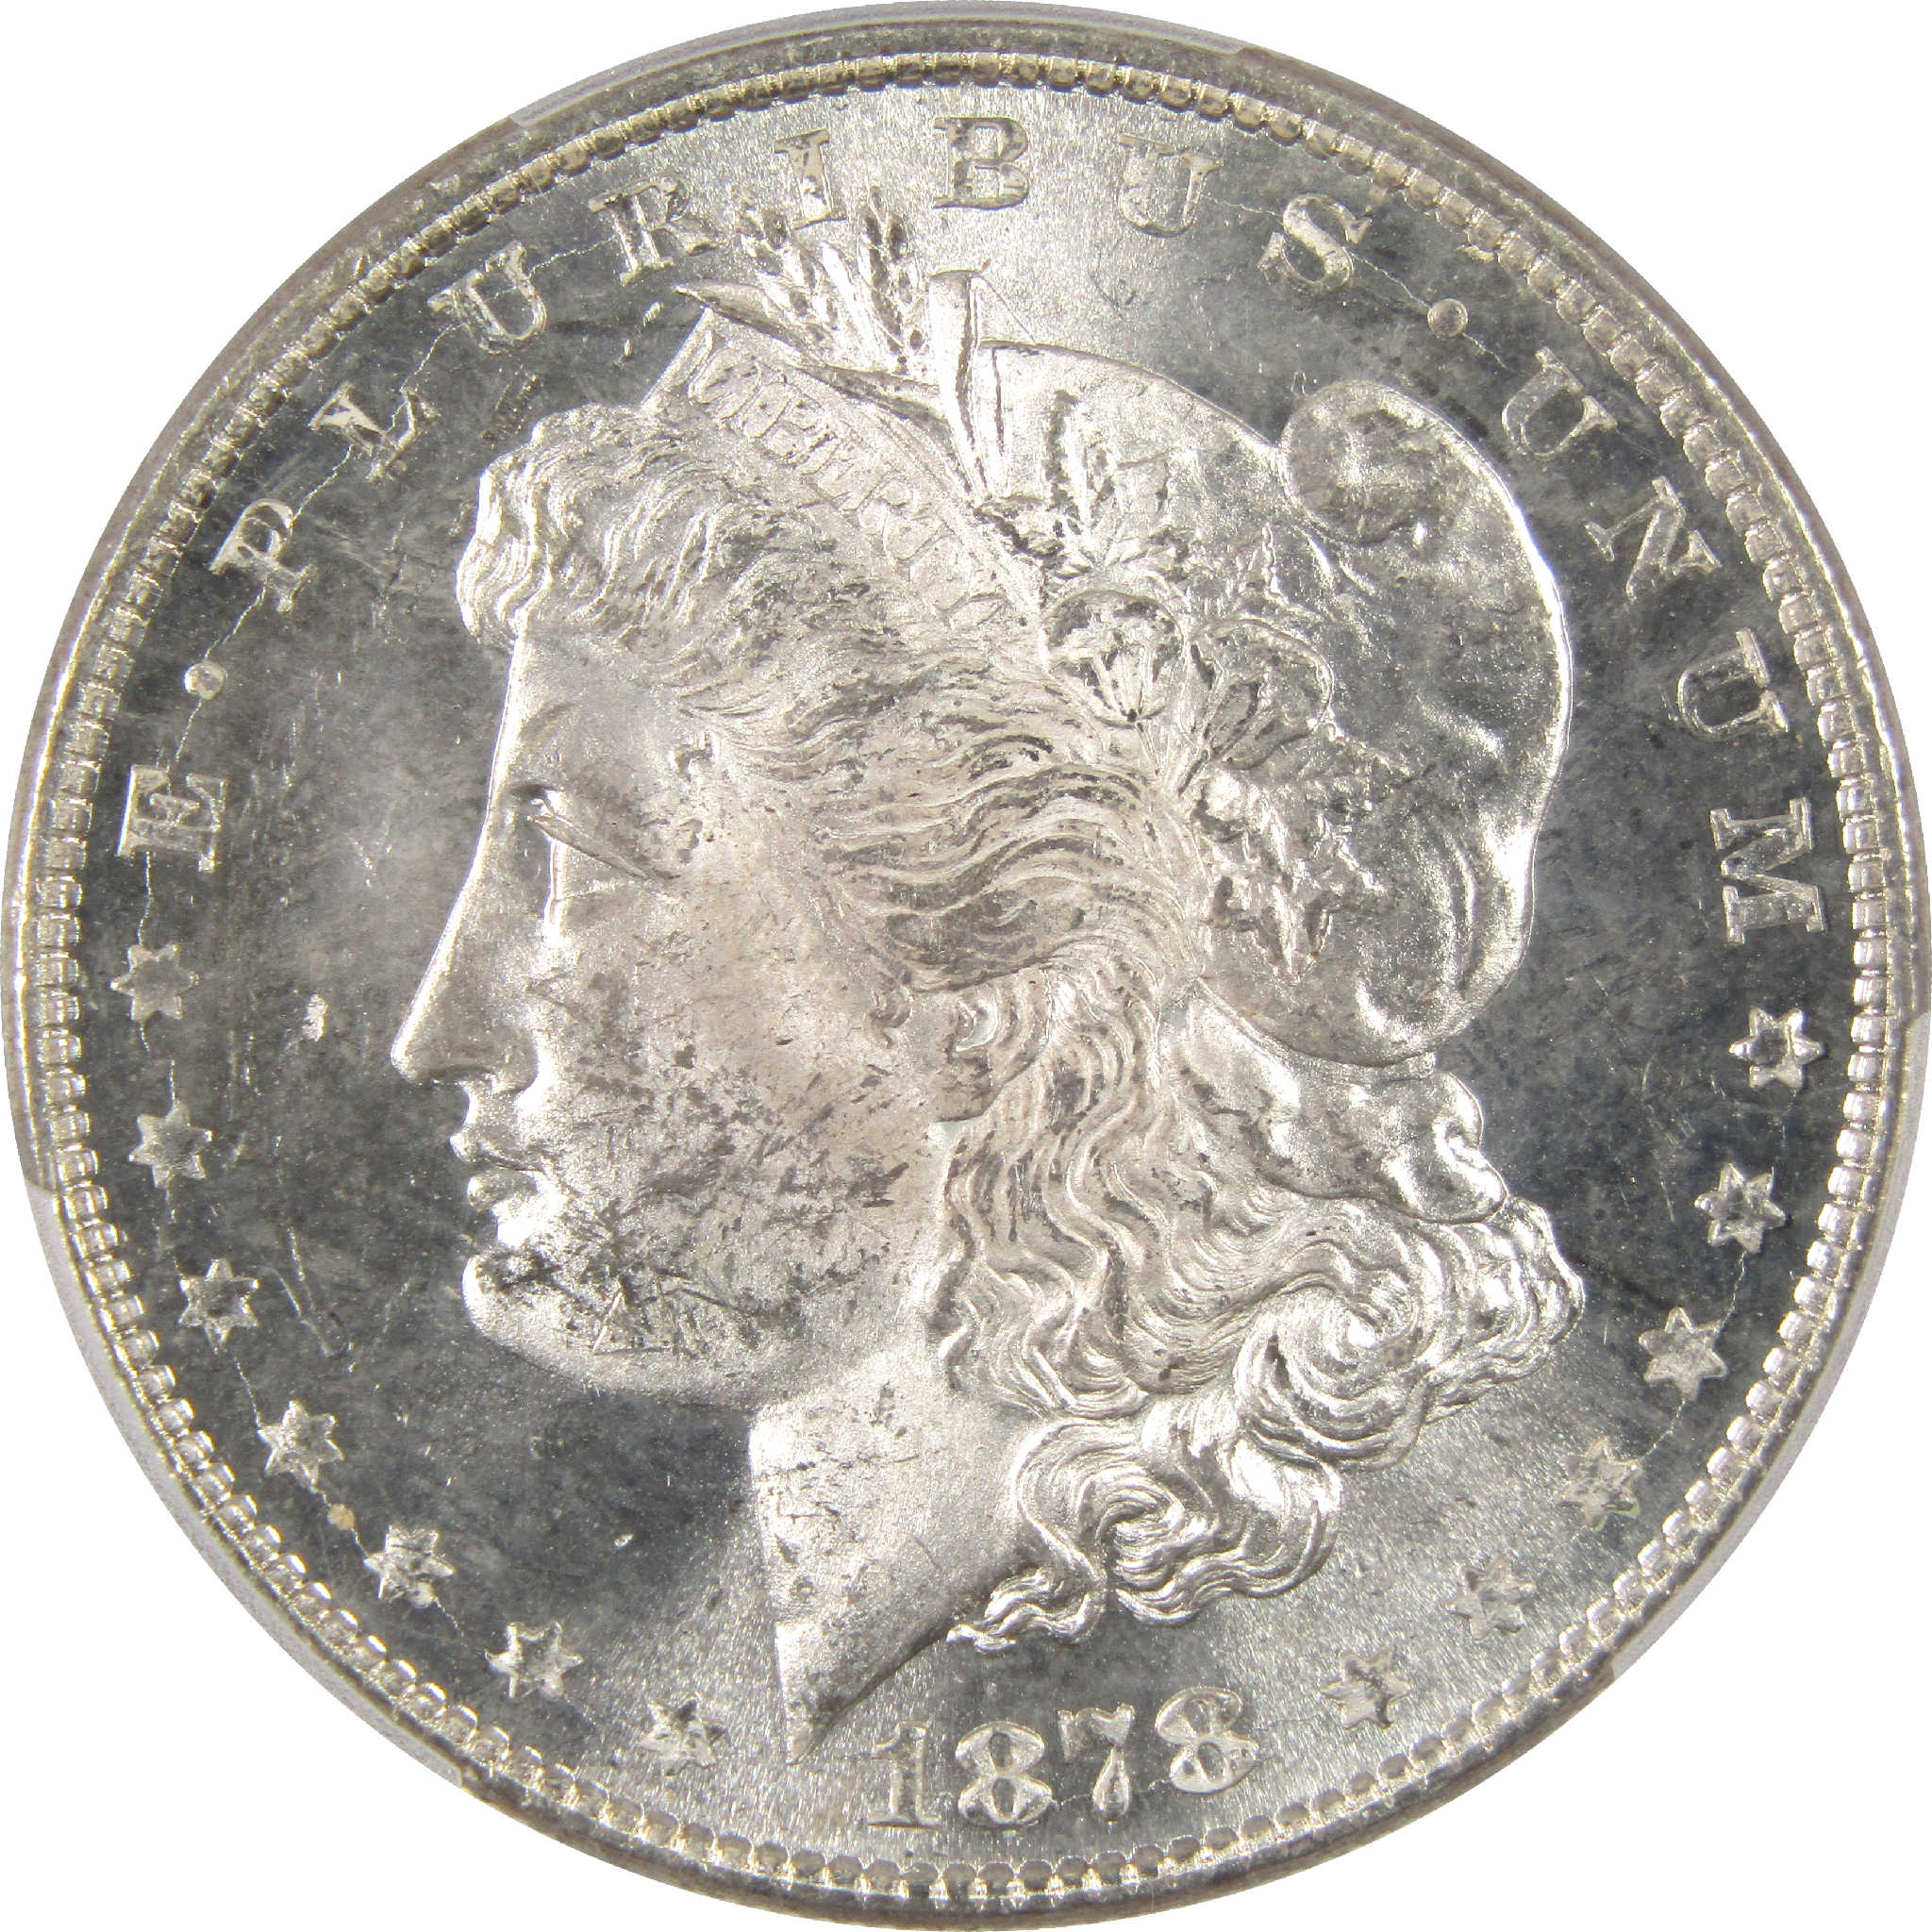 1878 8TF Morgan Dollar MS 63 PCGS Silver $1 Uncirculated SKU:I11335 - Morgan coin - Morgan silver dollar - Morgan silver dollar for sale - Profile Coins &amp; Collectibles